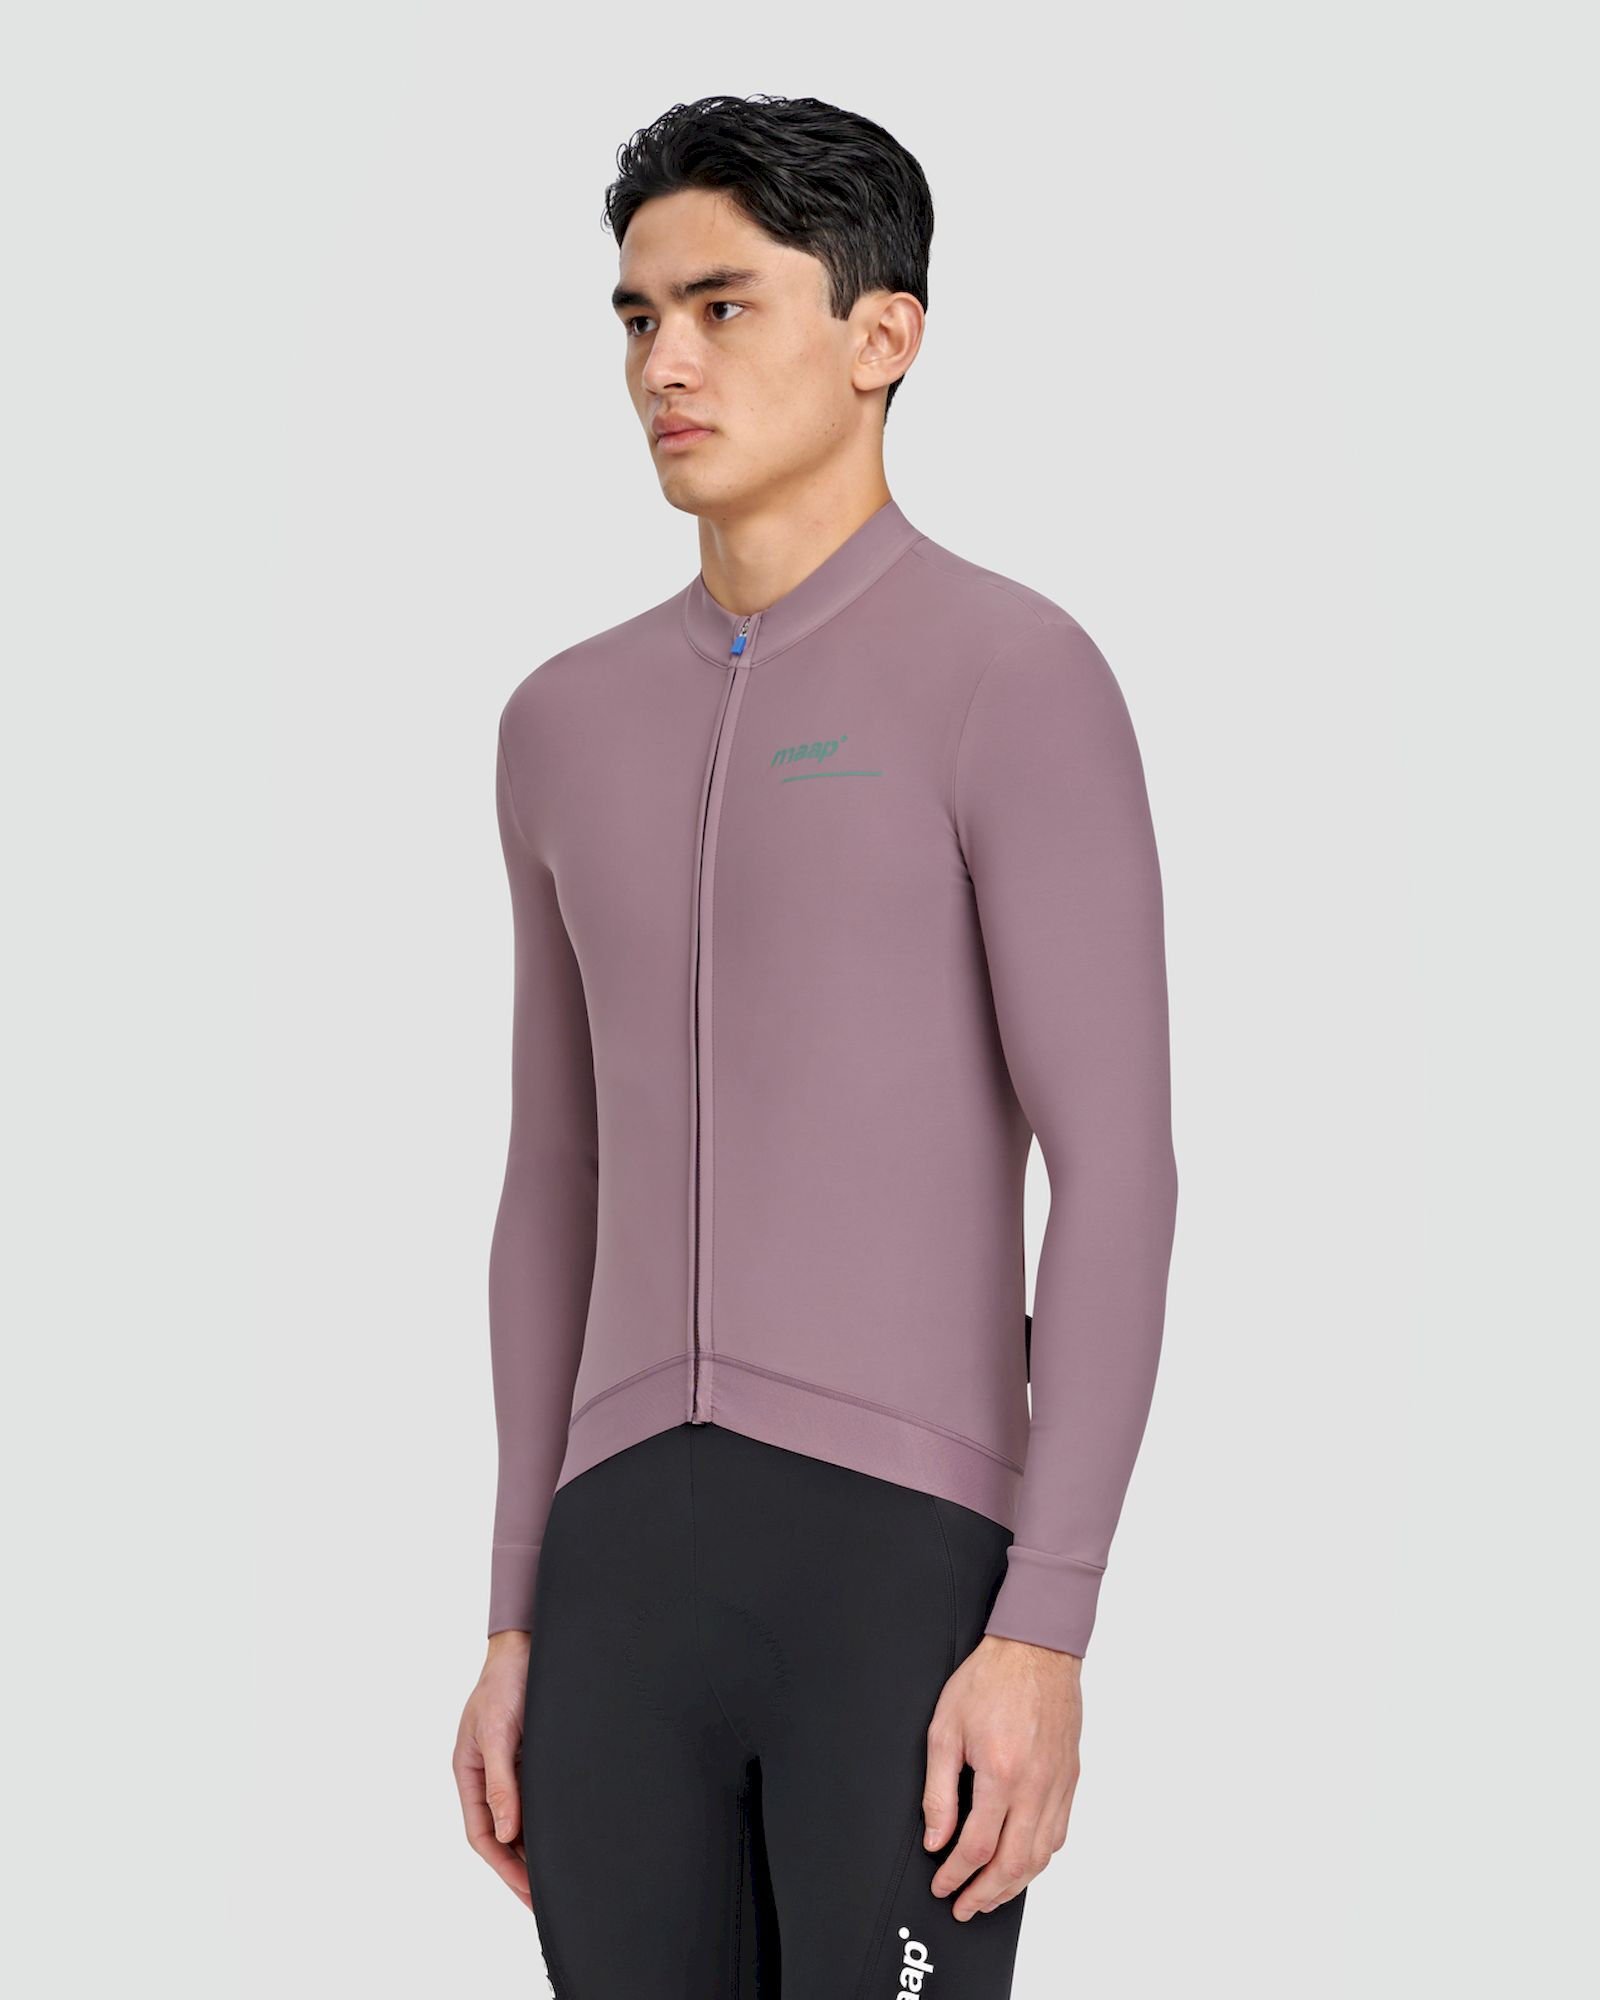 Maap Training Thermal LS Jersey - Maillot vélo homme | Hardloop